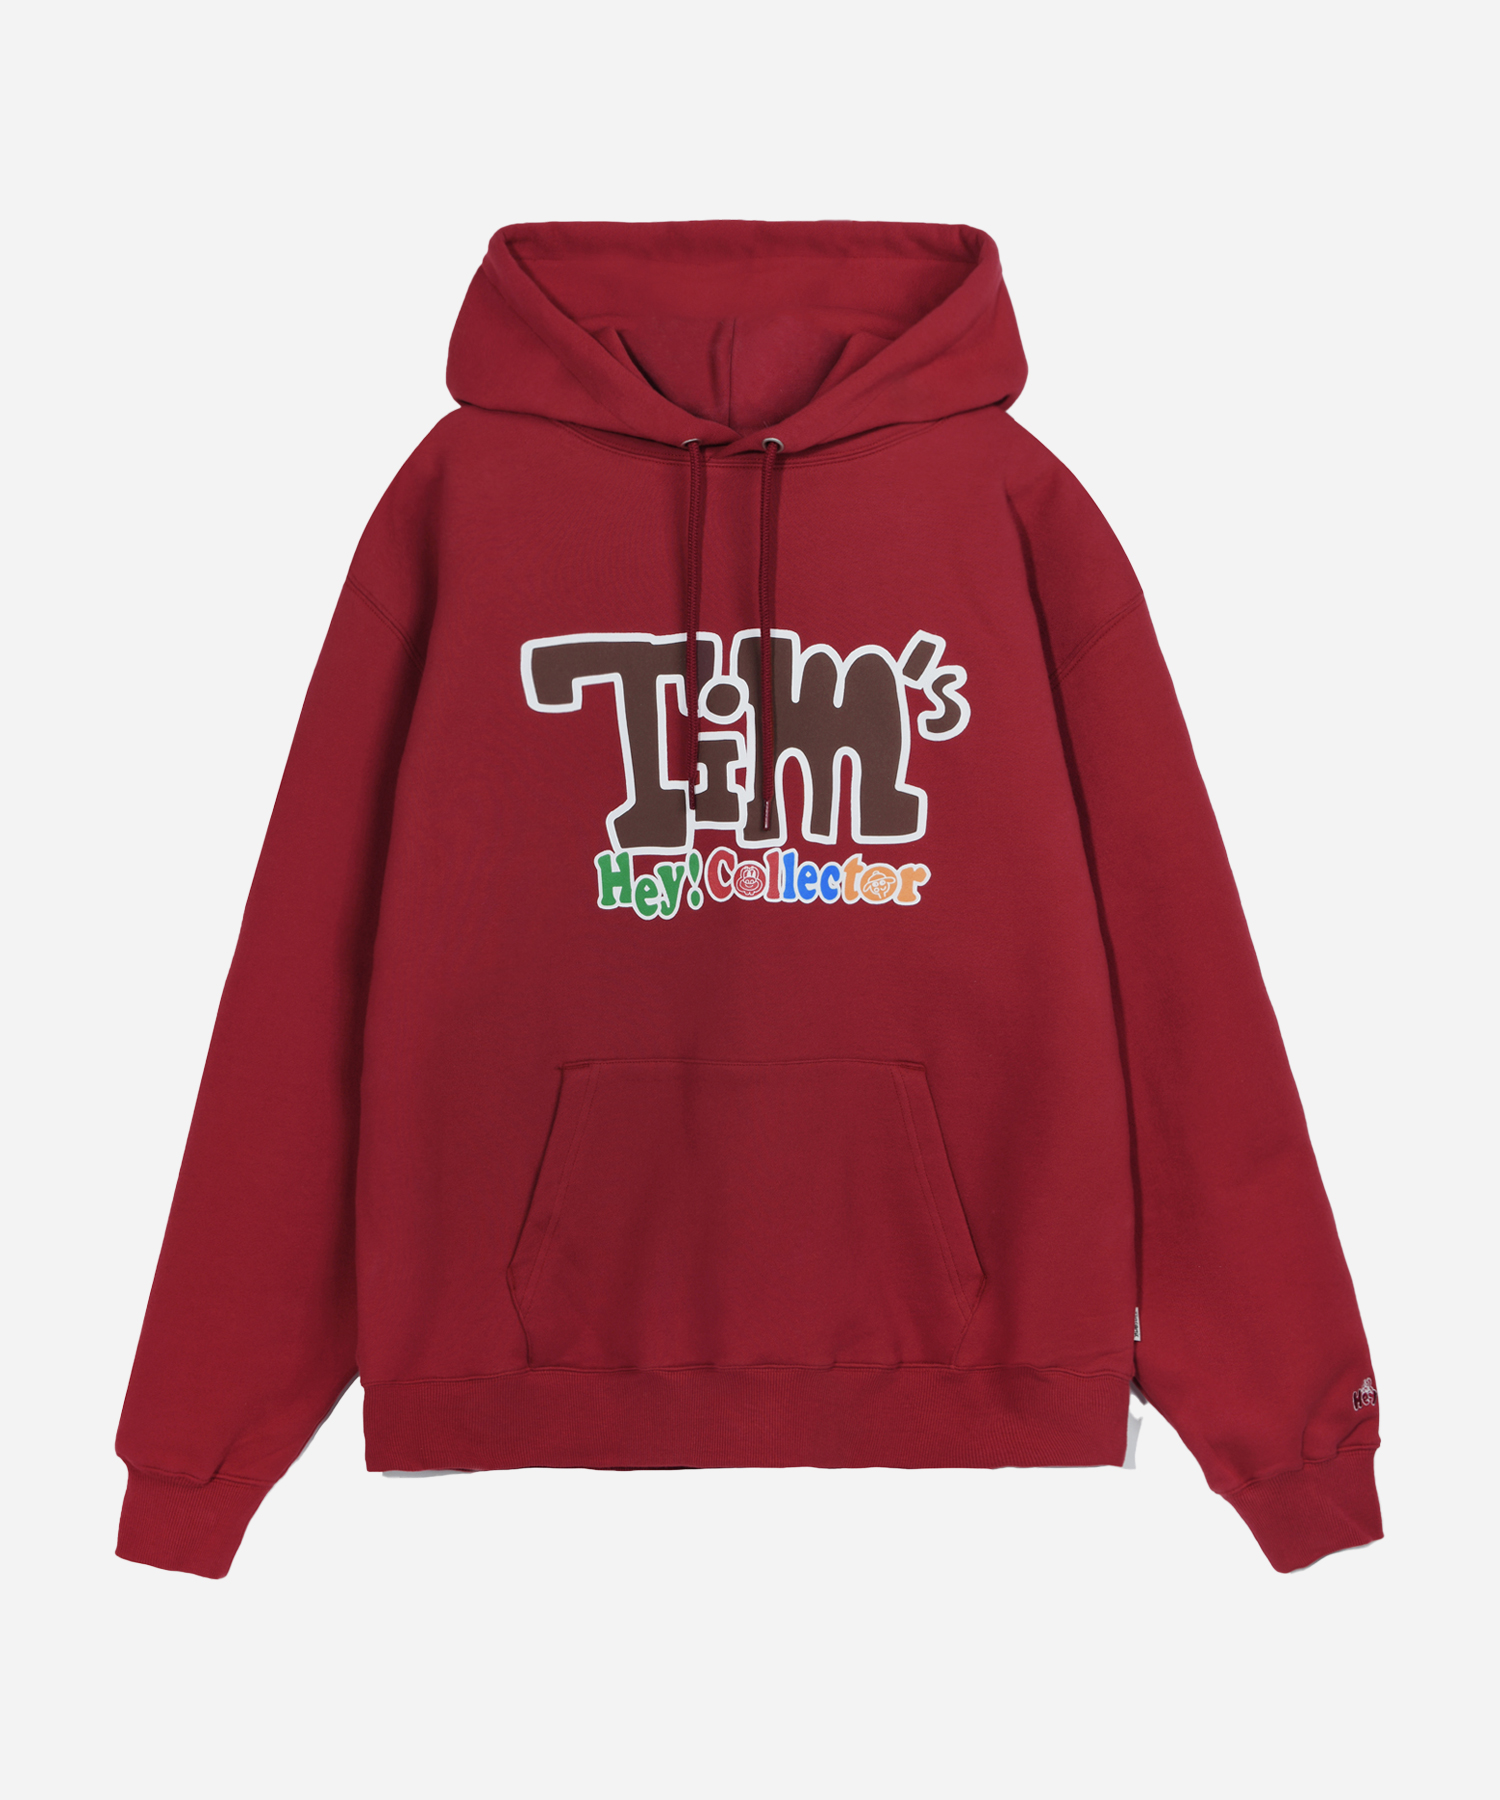 [TIMCOMIX X HEY COLLECTOR] TIMS HOODIE RED